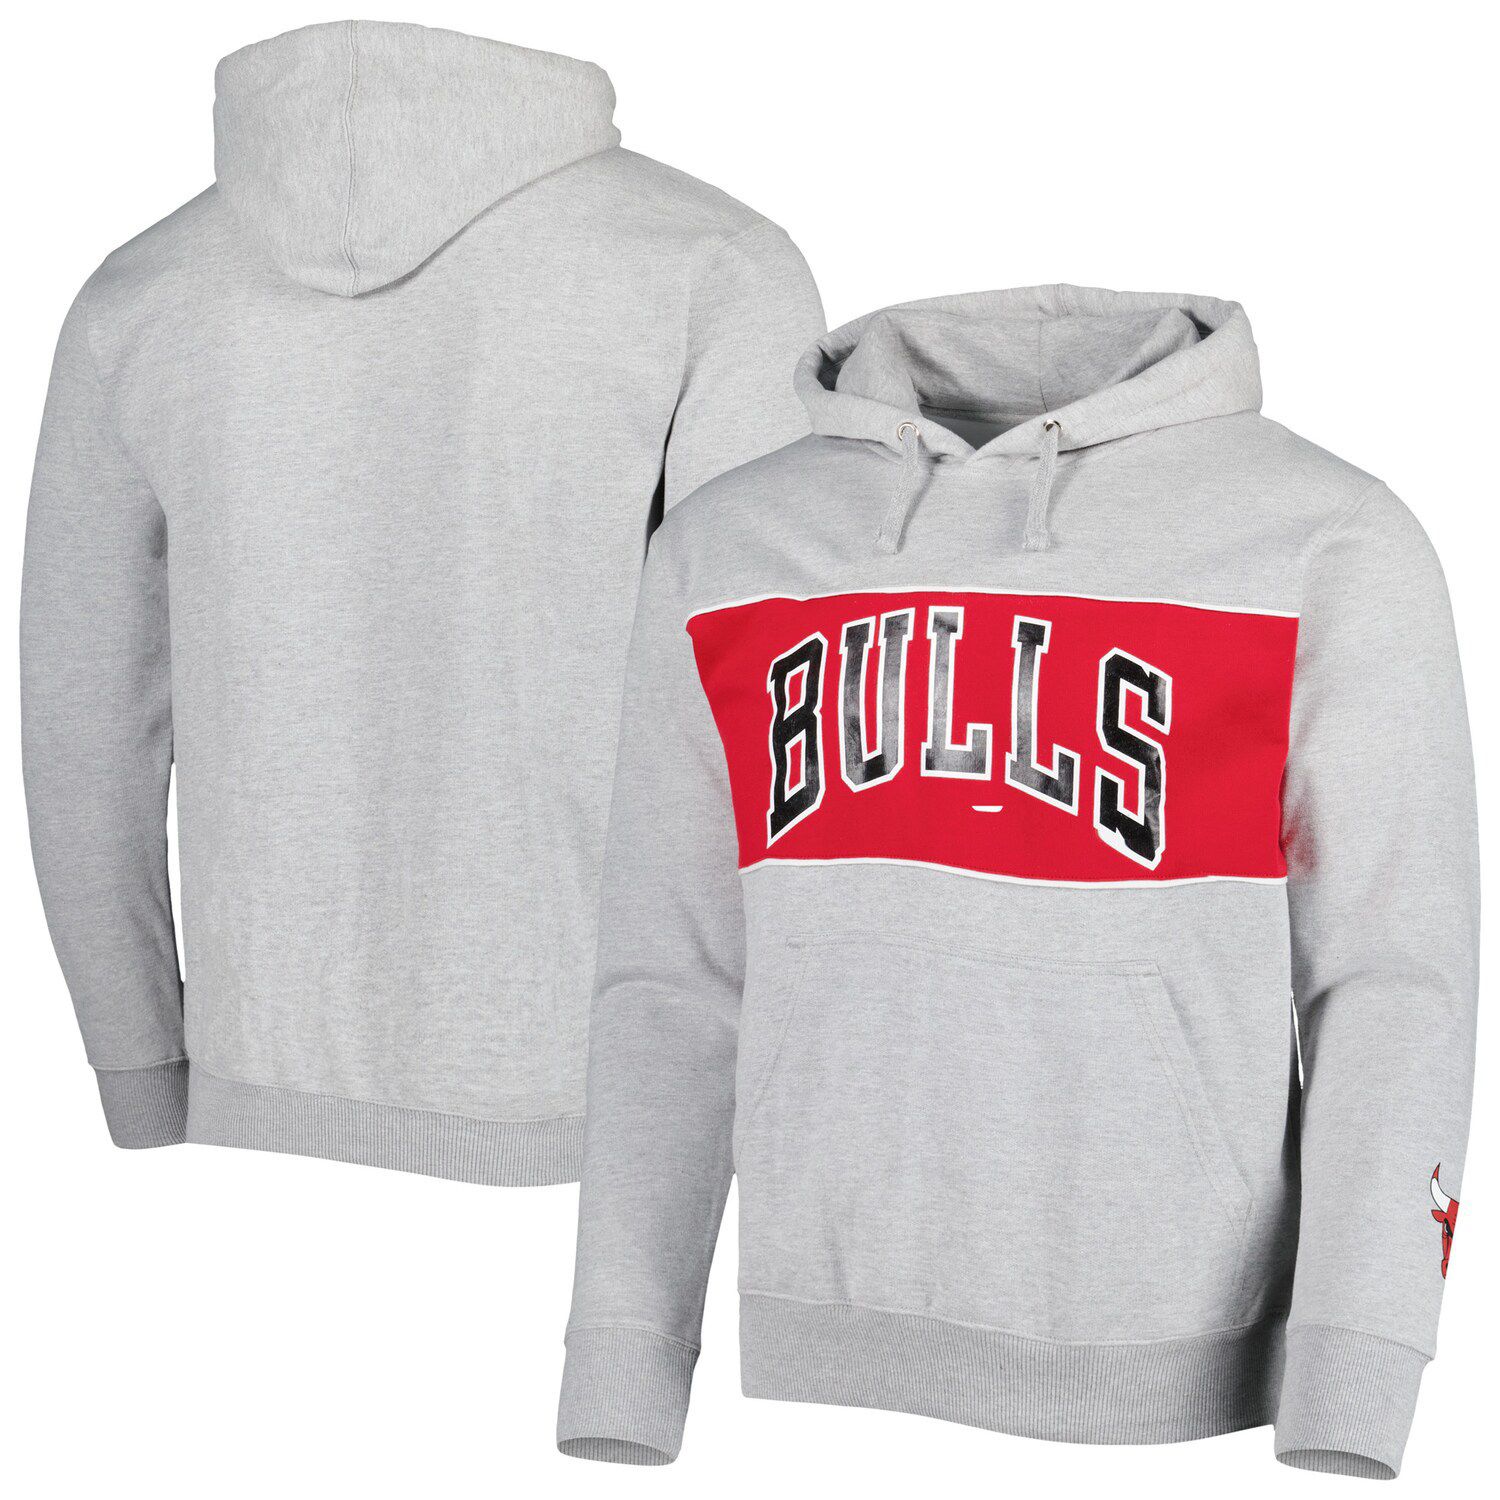 Nike Youth Chicago Bulls Spotlight Pullover Fleece Hoodie - Red - L Each